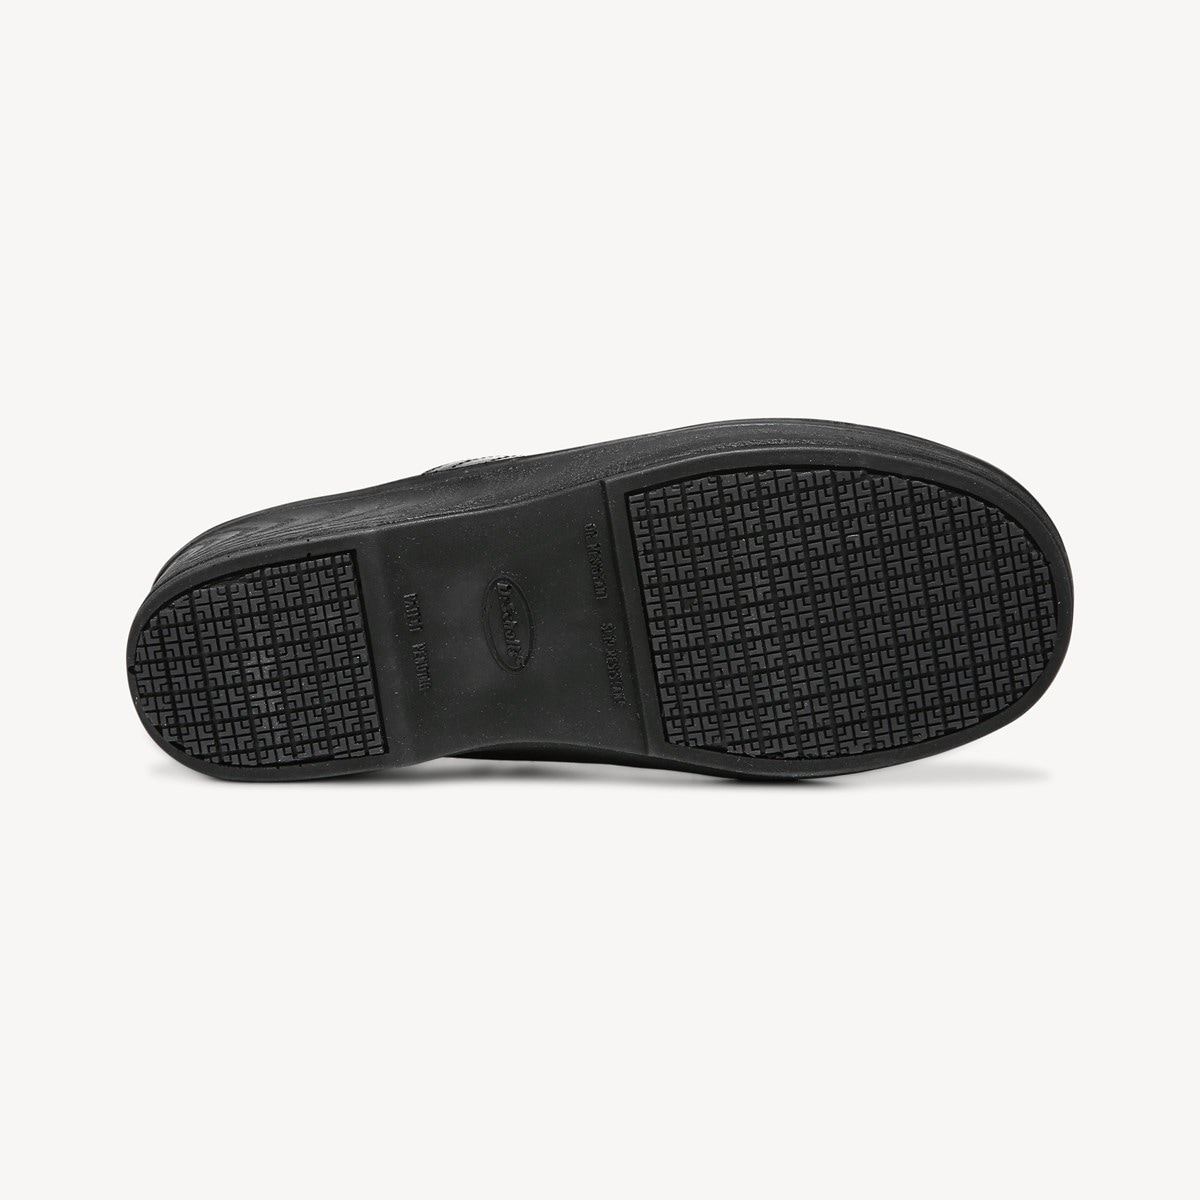 slip resistant bottoms for shoes